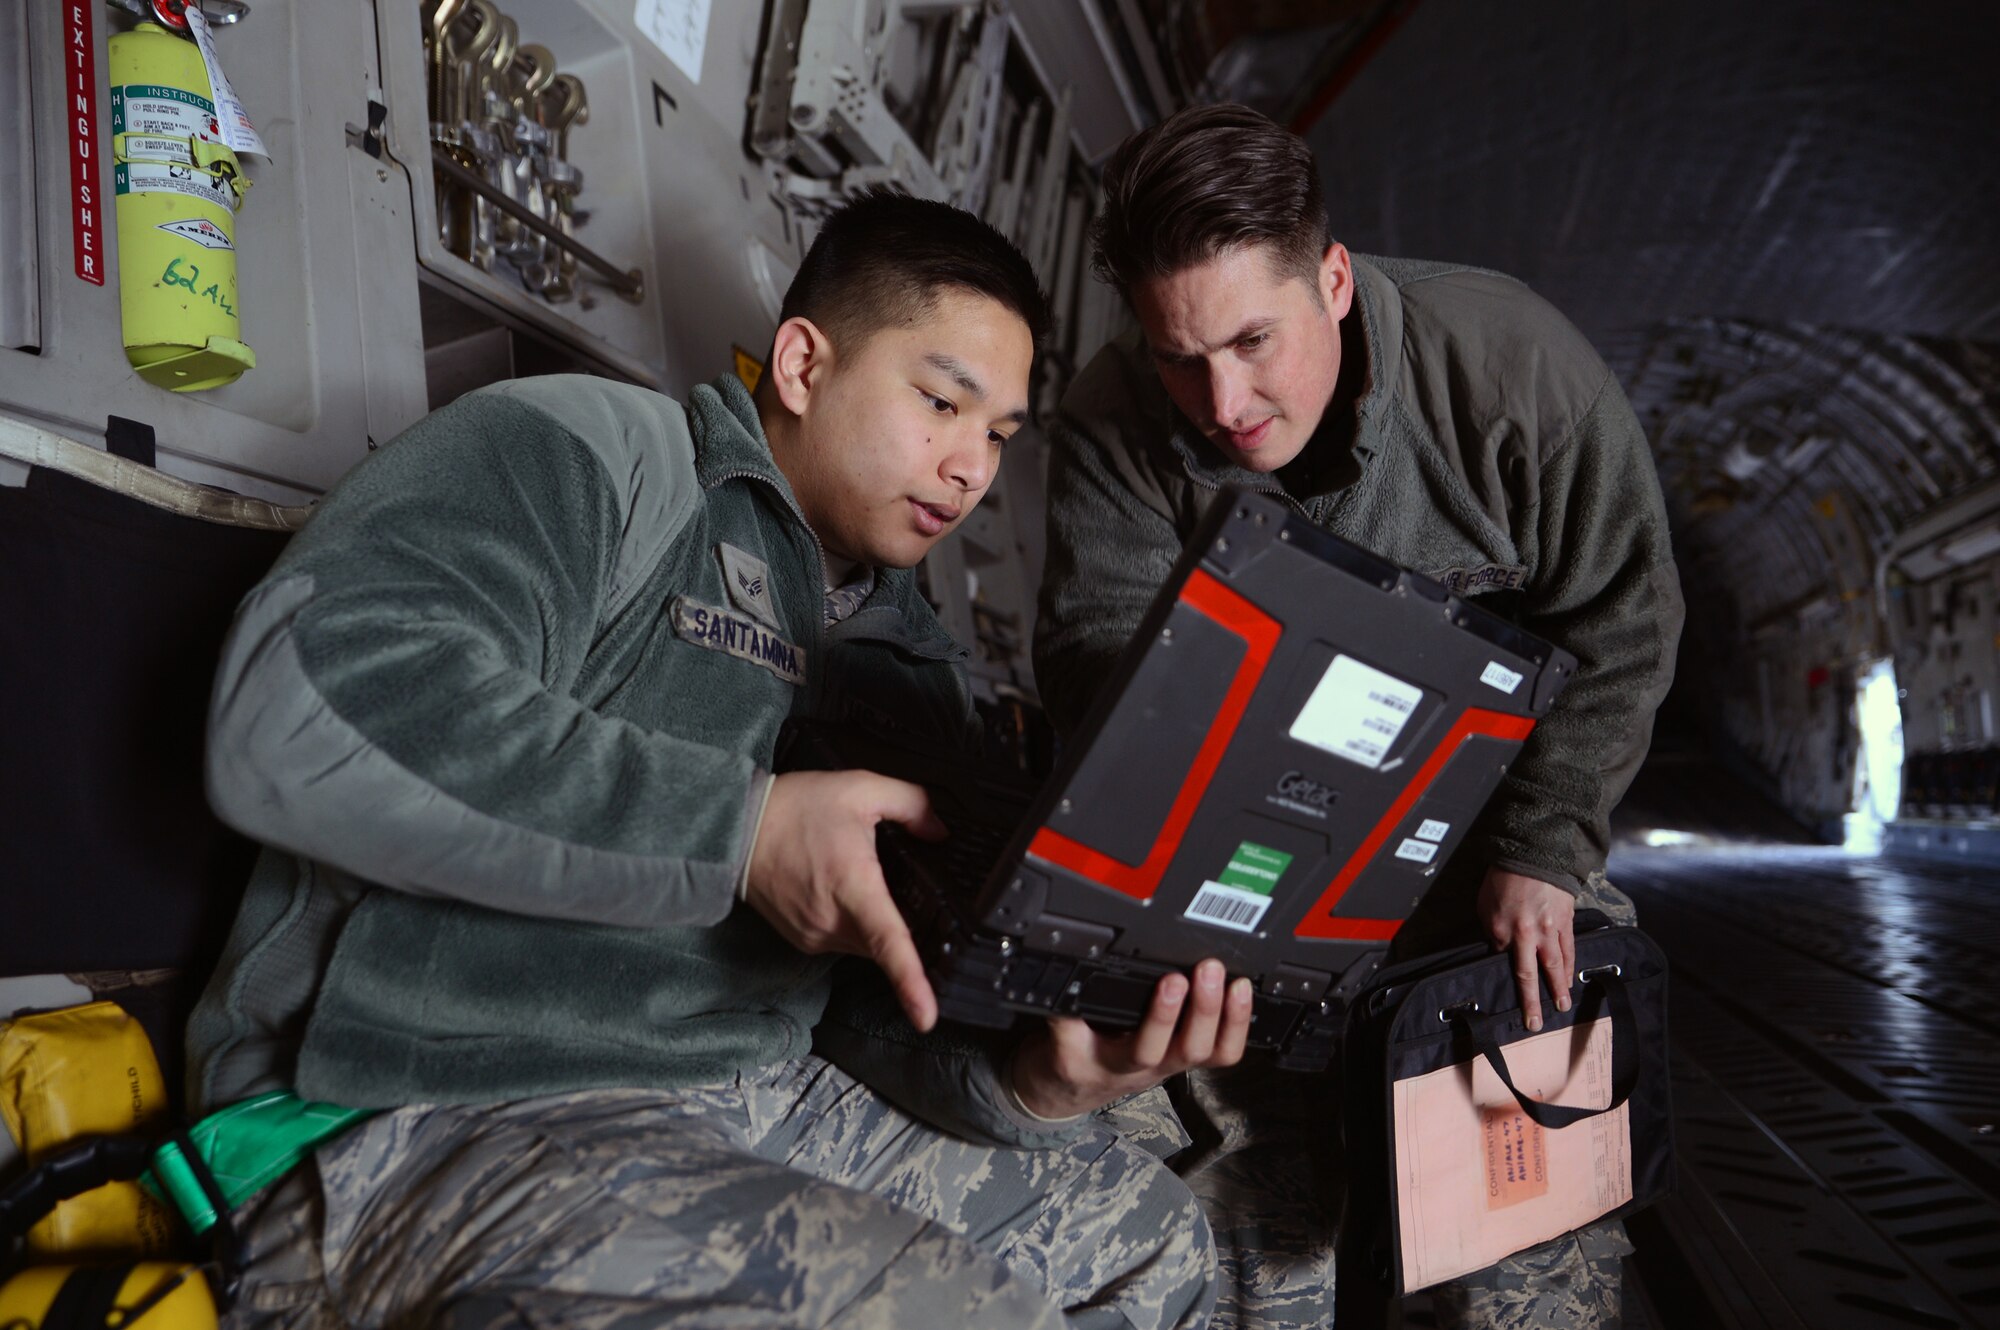 Senior Airman Facundo Santamina (left), 62nd Aircraft Maintenance Squadron crew chief and Staff Sgt. James Pomeroy, 62nd AMXS crew chief, review a technical order prior to performing maintenance on a C-17 Globemaster III aircraft March 20, 2017 at Joint Base Lewis-McChord, Wash. In order to inspect and diagnose aircraft maintenance issues, crew chiefs go through more than five months of technical training and months of on the job training. (U.S. Air Force photo/Senior Airman Jacob Jimenez)      